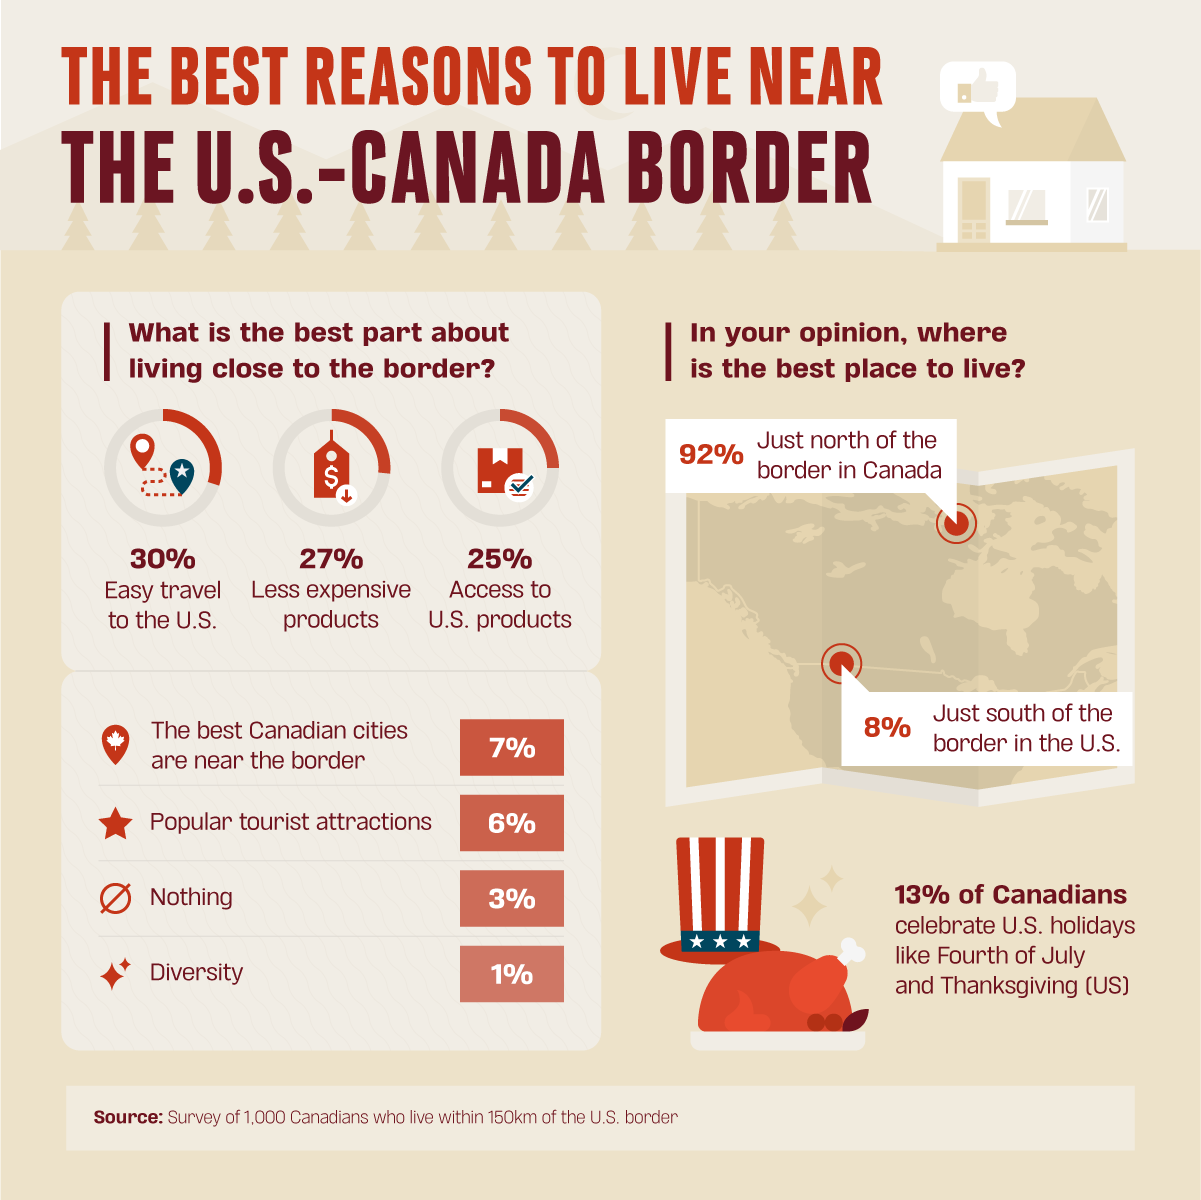 The best reasons to live near the U.S.-Canada border